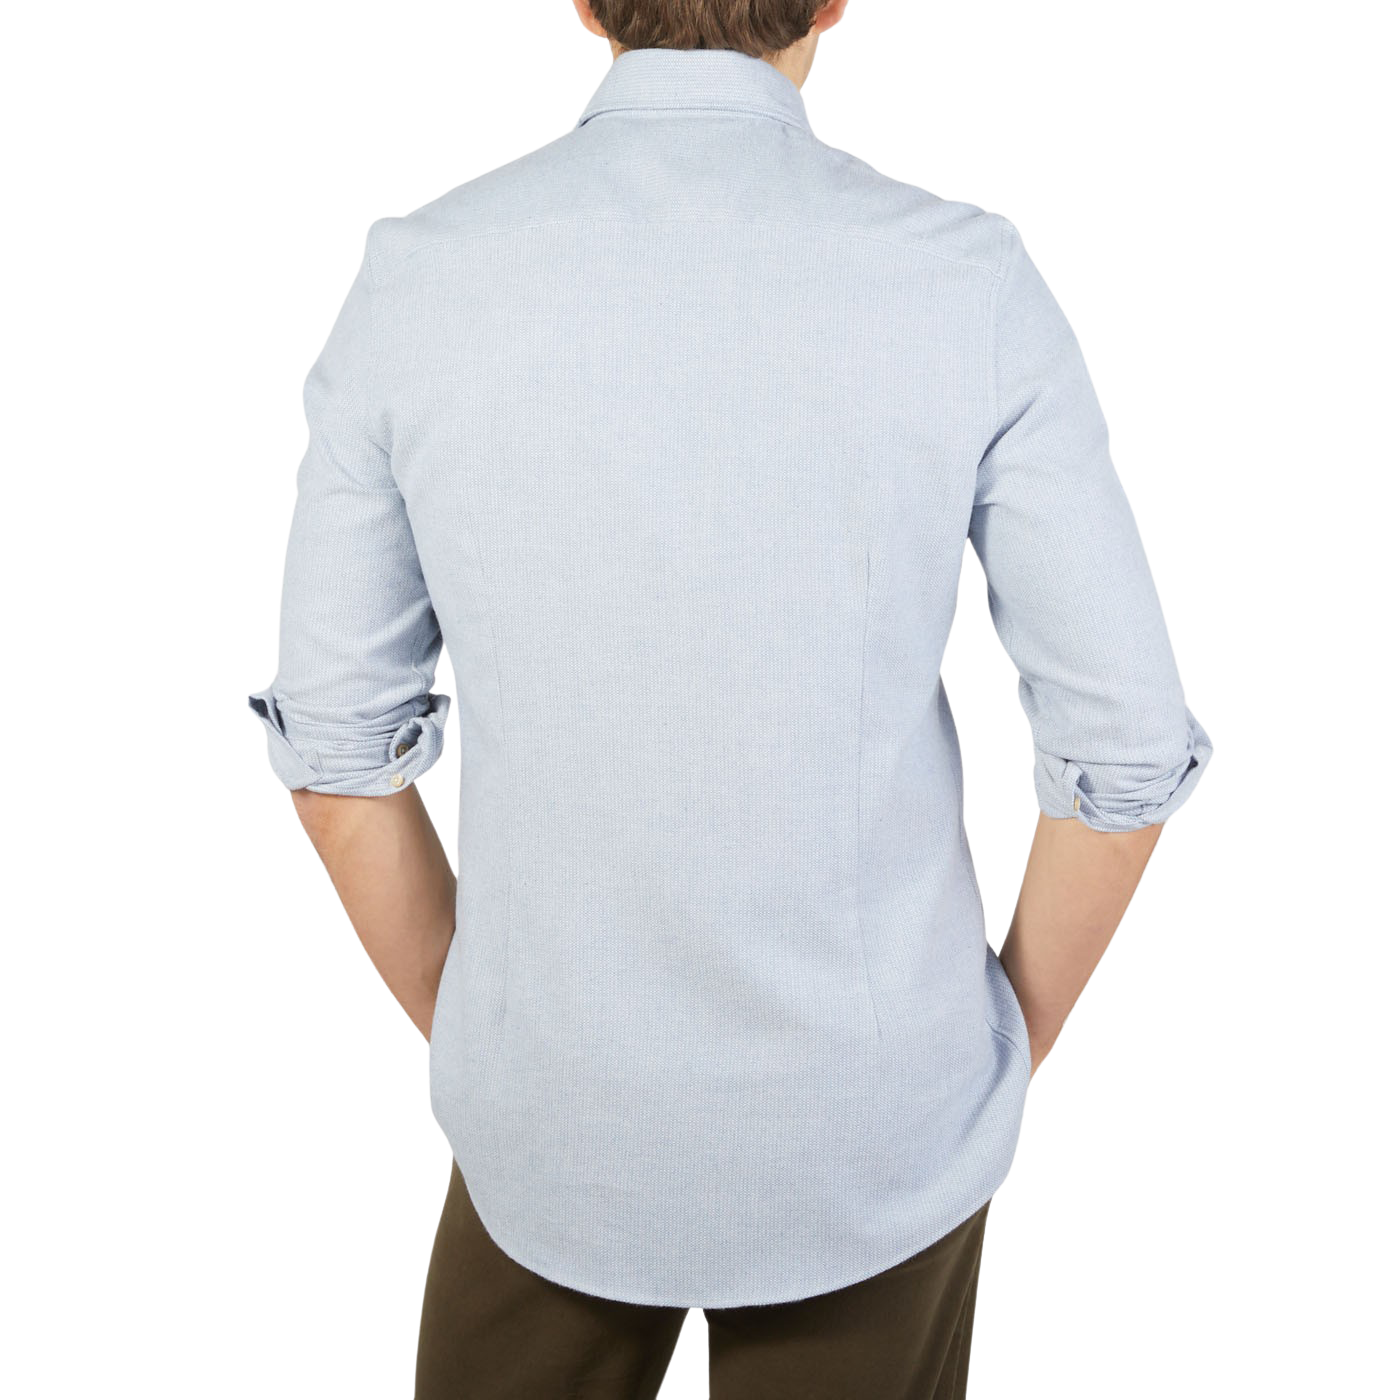 The back view of a man wearing a blue Stenströms Light Blue Brushed Cotton Fitted Body Shirt.